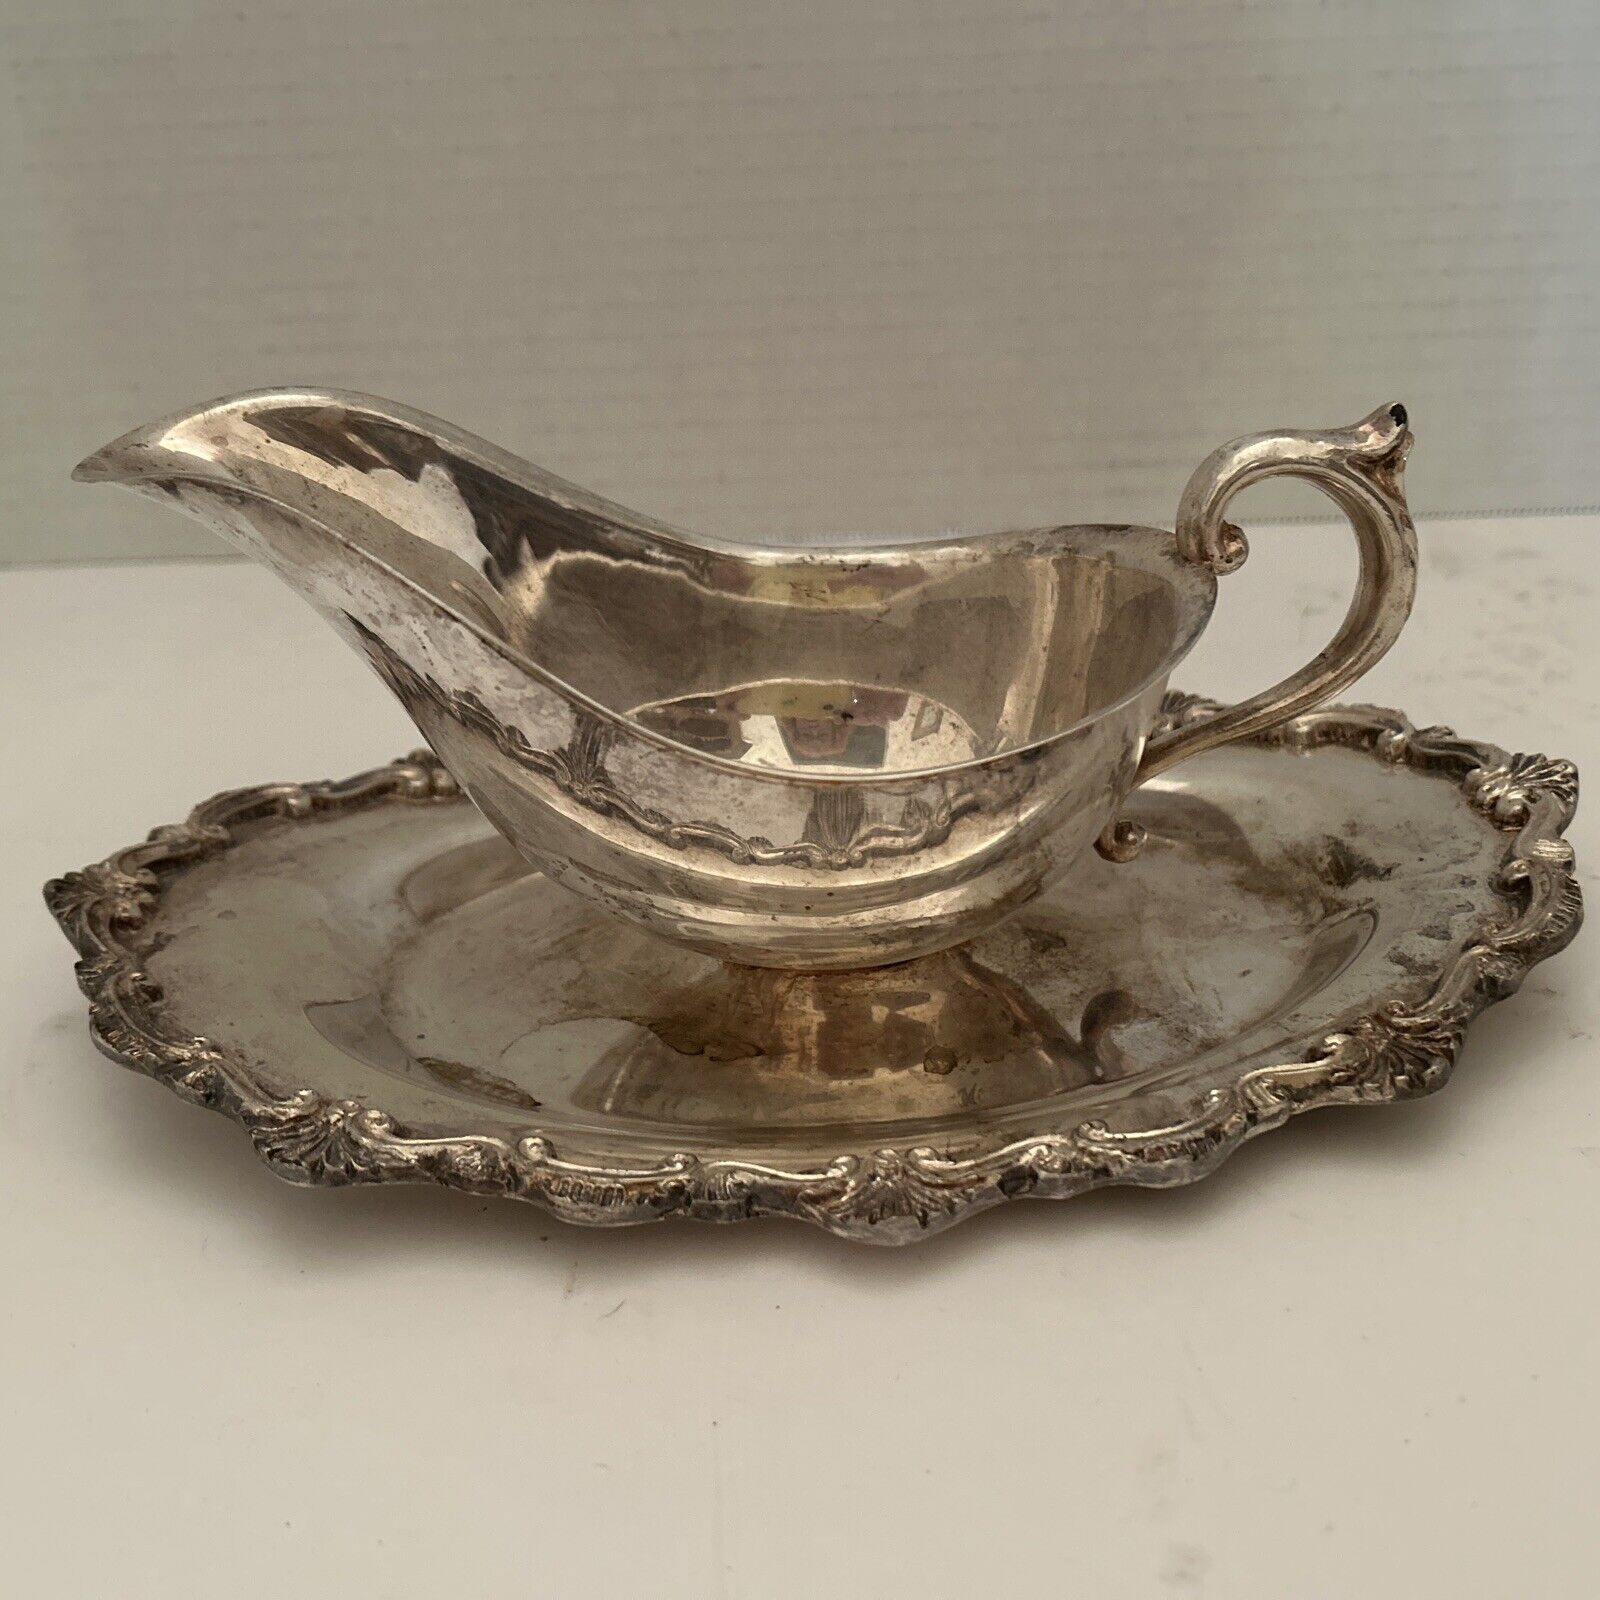 Silver Gravy Boat with Attached Underplate